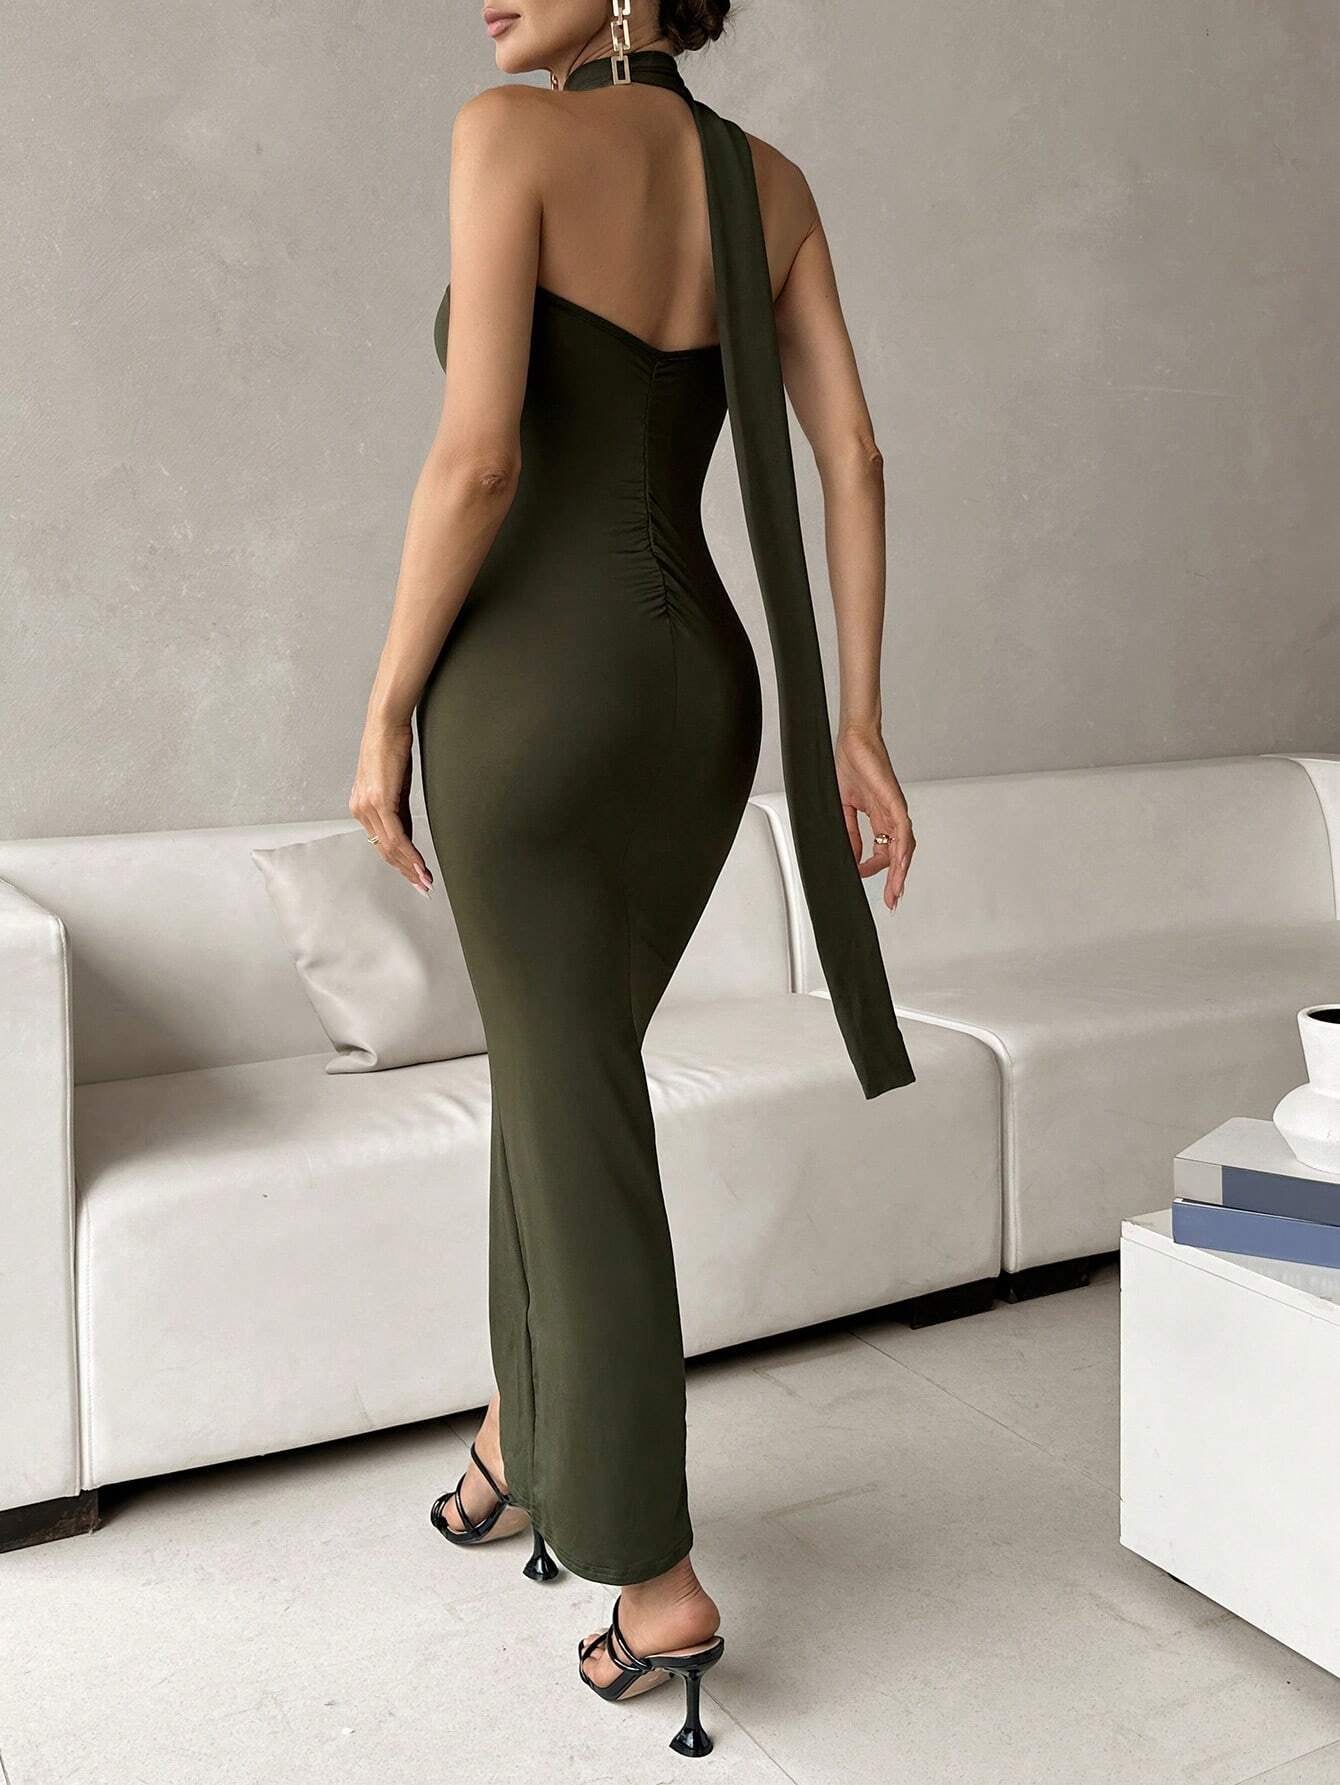 Solid Halter Neck Backless Bodycon Dress